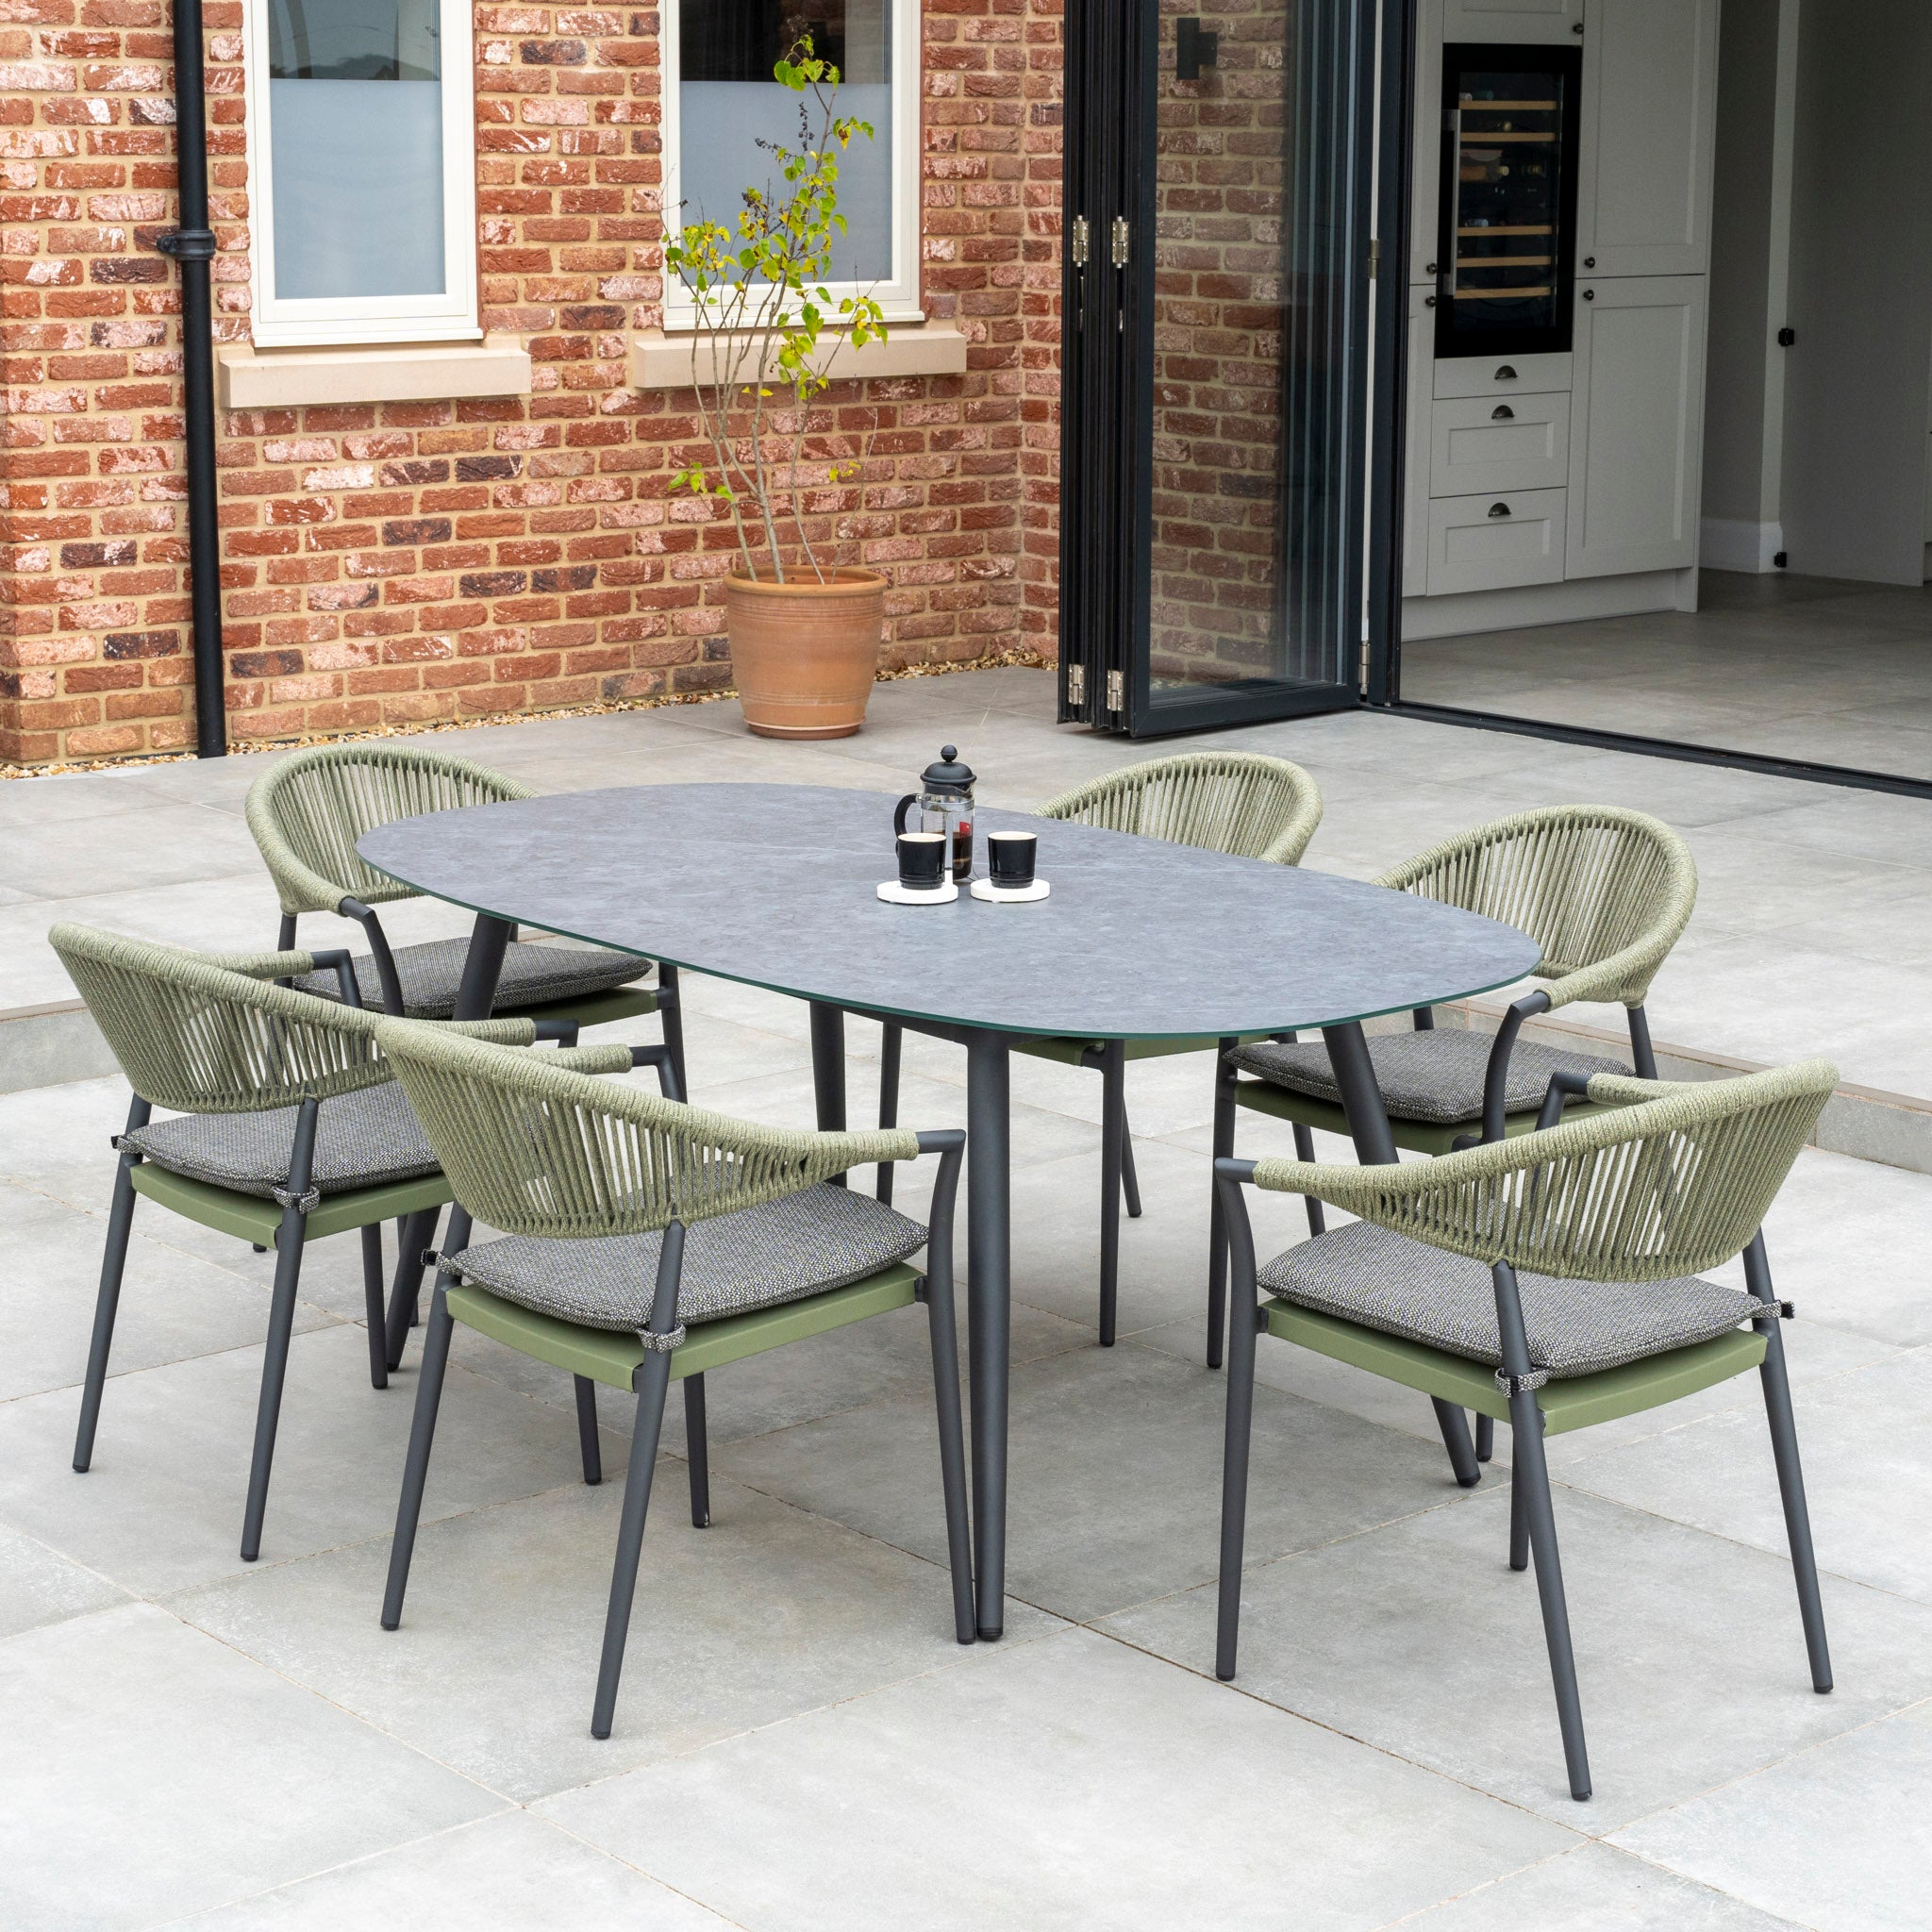 Cloverly 6 Seat Rope Oval Dining Set with Ceramic Table in Olive Green